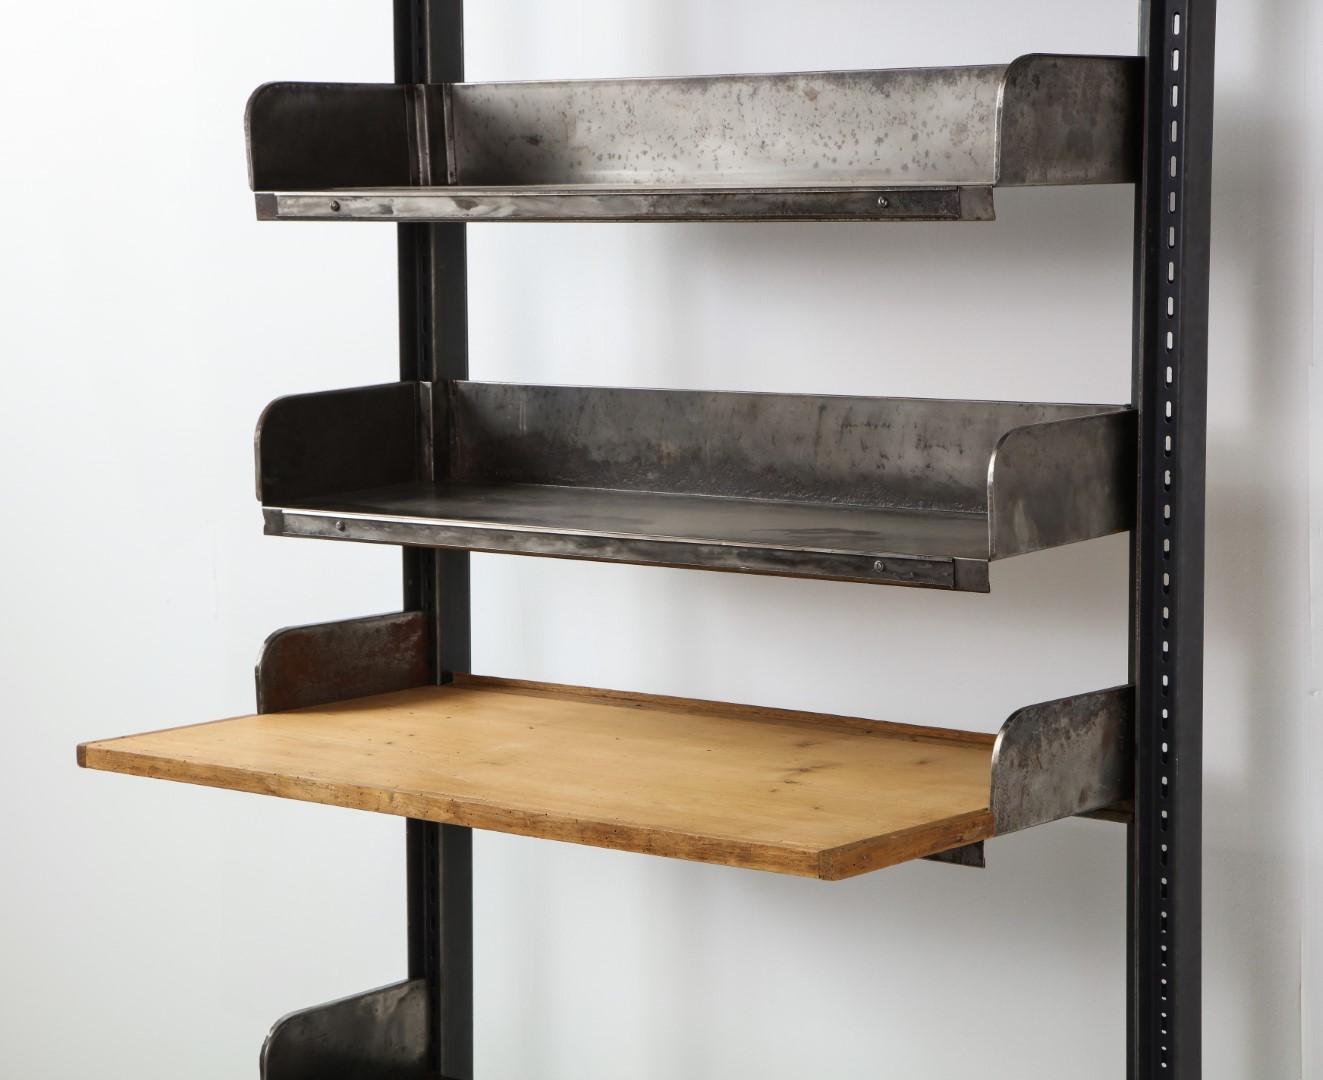 1950s French midcentury industrial iron adjustable shelving system with wood desktop. Requires assembly. Provenance: Marché Paul Bert Serpette, Paris. 

Measures: Shelf depth 13.5